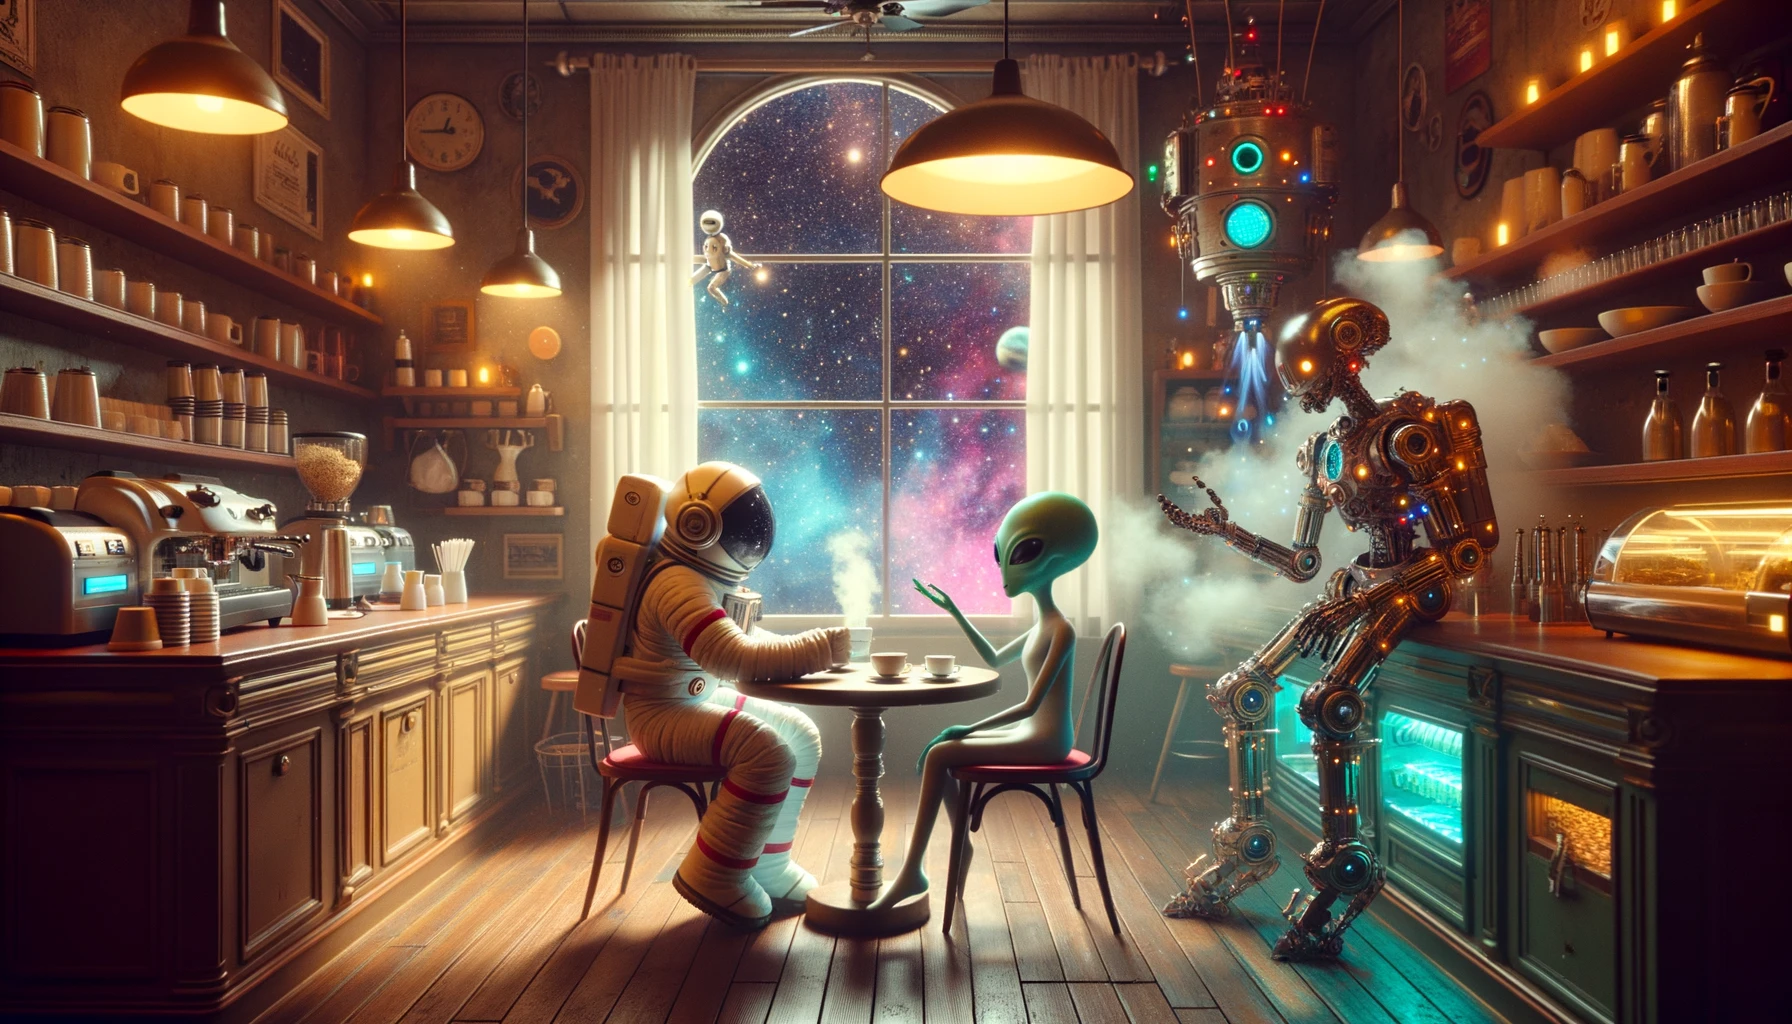 Photo of a quaint space cafe, its ambiance warm and inviting. At a table near the window, which offers a view of the stars, a human astronaut and a friendly alien engage in a relaxed conversation. They share a cup of cosmic tea, its contents shimmering with colors not seen on Earth. In the background, a robot barista, equipped with multiple arms and advanced tools, expertly prepares a variety of drinks, steam and lights emanating from the coffee machines.